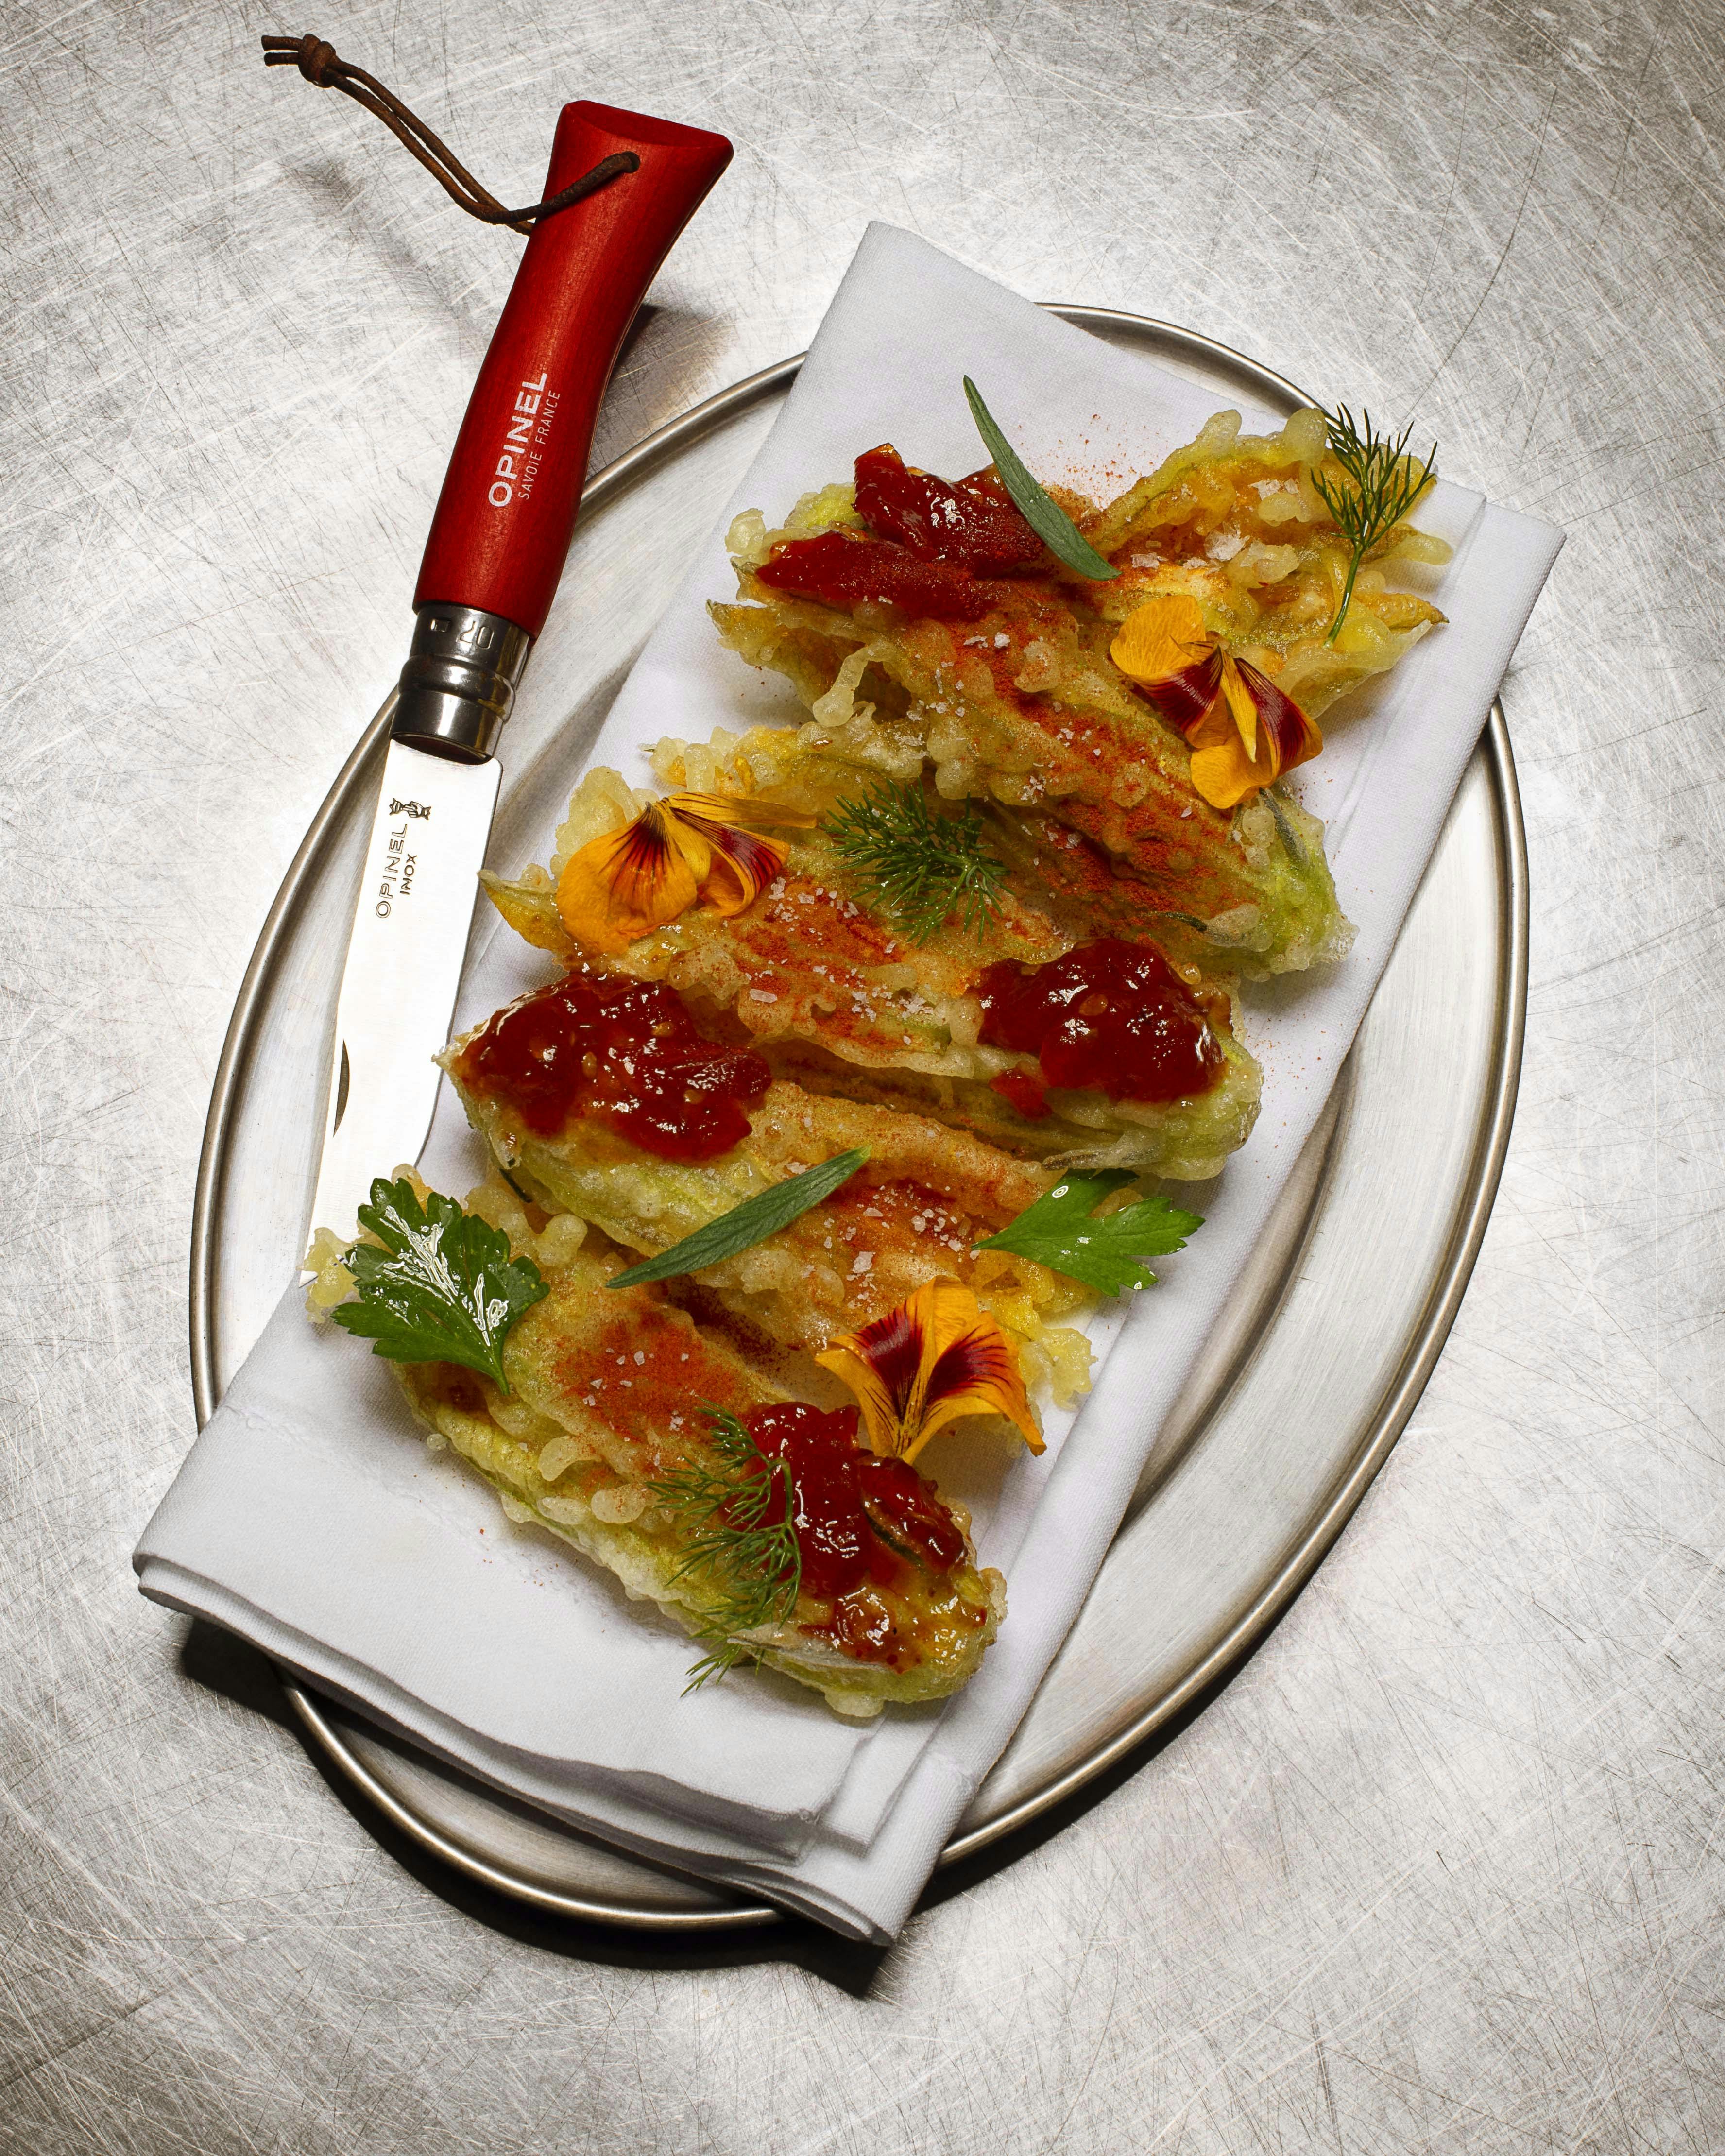 Image of finished Courgette Flowers dish